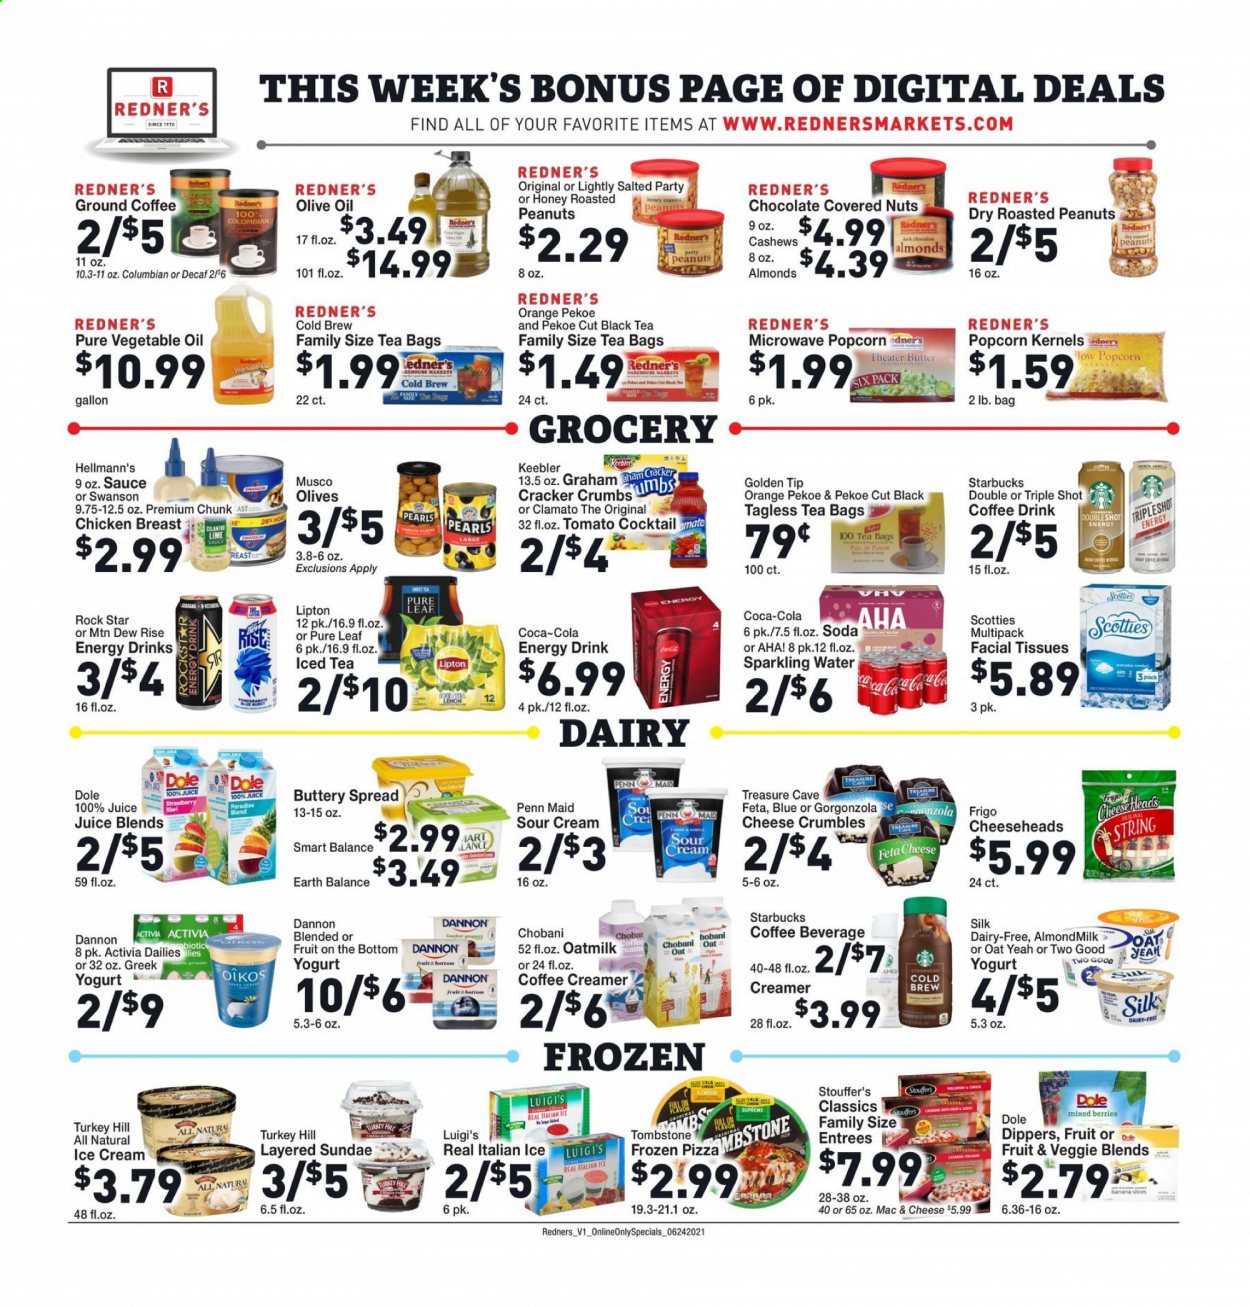 thumbnail - Redner's Markets Flyer - 06/24/2021 - 06/30/2021 - Sales products - Dole, kiwi, oranges, gorgonzola, feta, cheese crumbles, greek yoghurt, yoghurt, Activia, Oikos, Chobani, Dannon, almond milk, Silk, oat milk, butter, buttery spread, sour cream, creamer, Hellmann’s, ice cream, Stouffer's, crackers, Keebler, popcorn, olives, vegetable oil, olive oil, oil, roasted peanuts, peanuts, Coca-Cola, Mountain Dew, juice, energy drink, Lipton, Clamato, soda, sparkling water, tea bags, Pure Leaf, Starbucks, ground coffee, chicken breasts, tissues, facial tissues. Page 7.